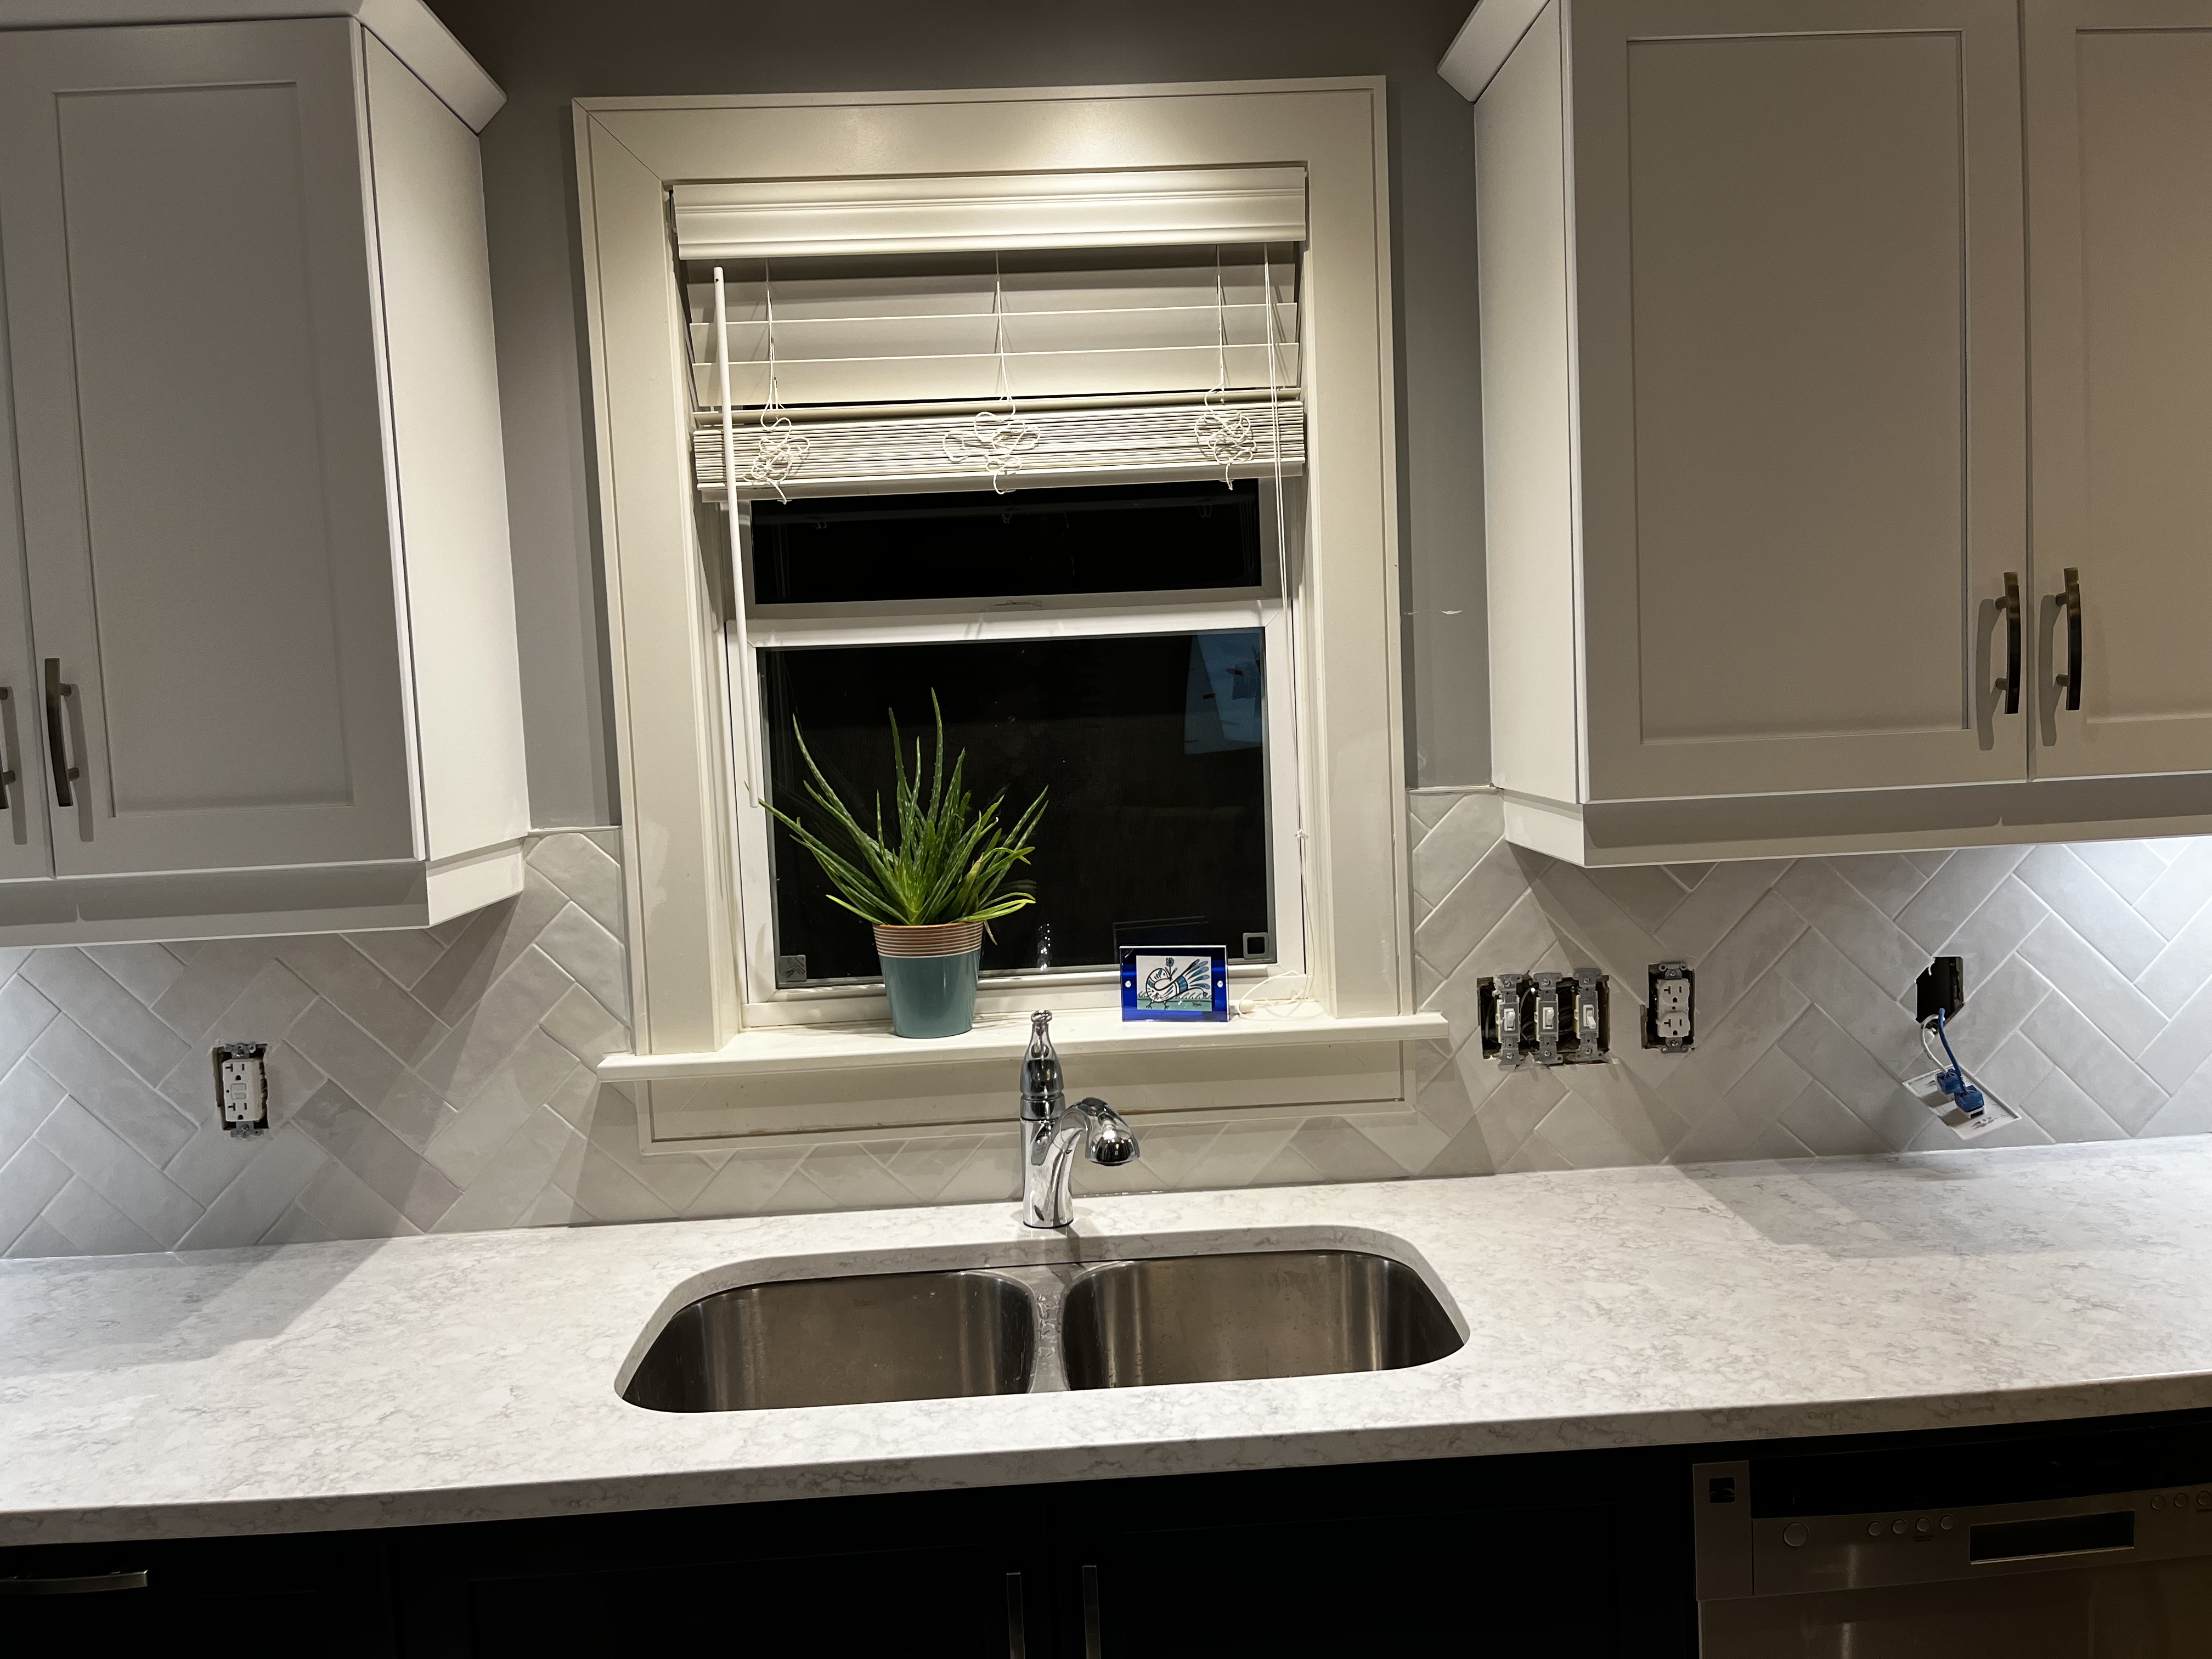 Quartz counters with an undermount sink and white upper cabinet doors finished beautifully with a herringbone tile backsplash